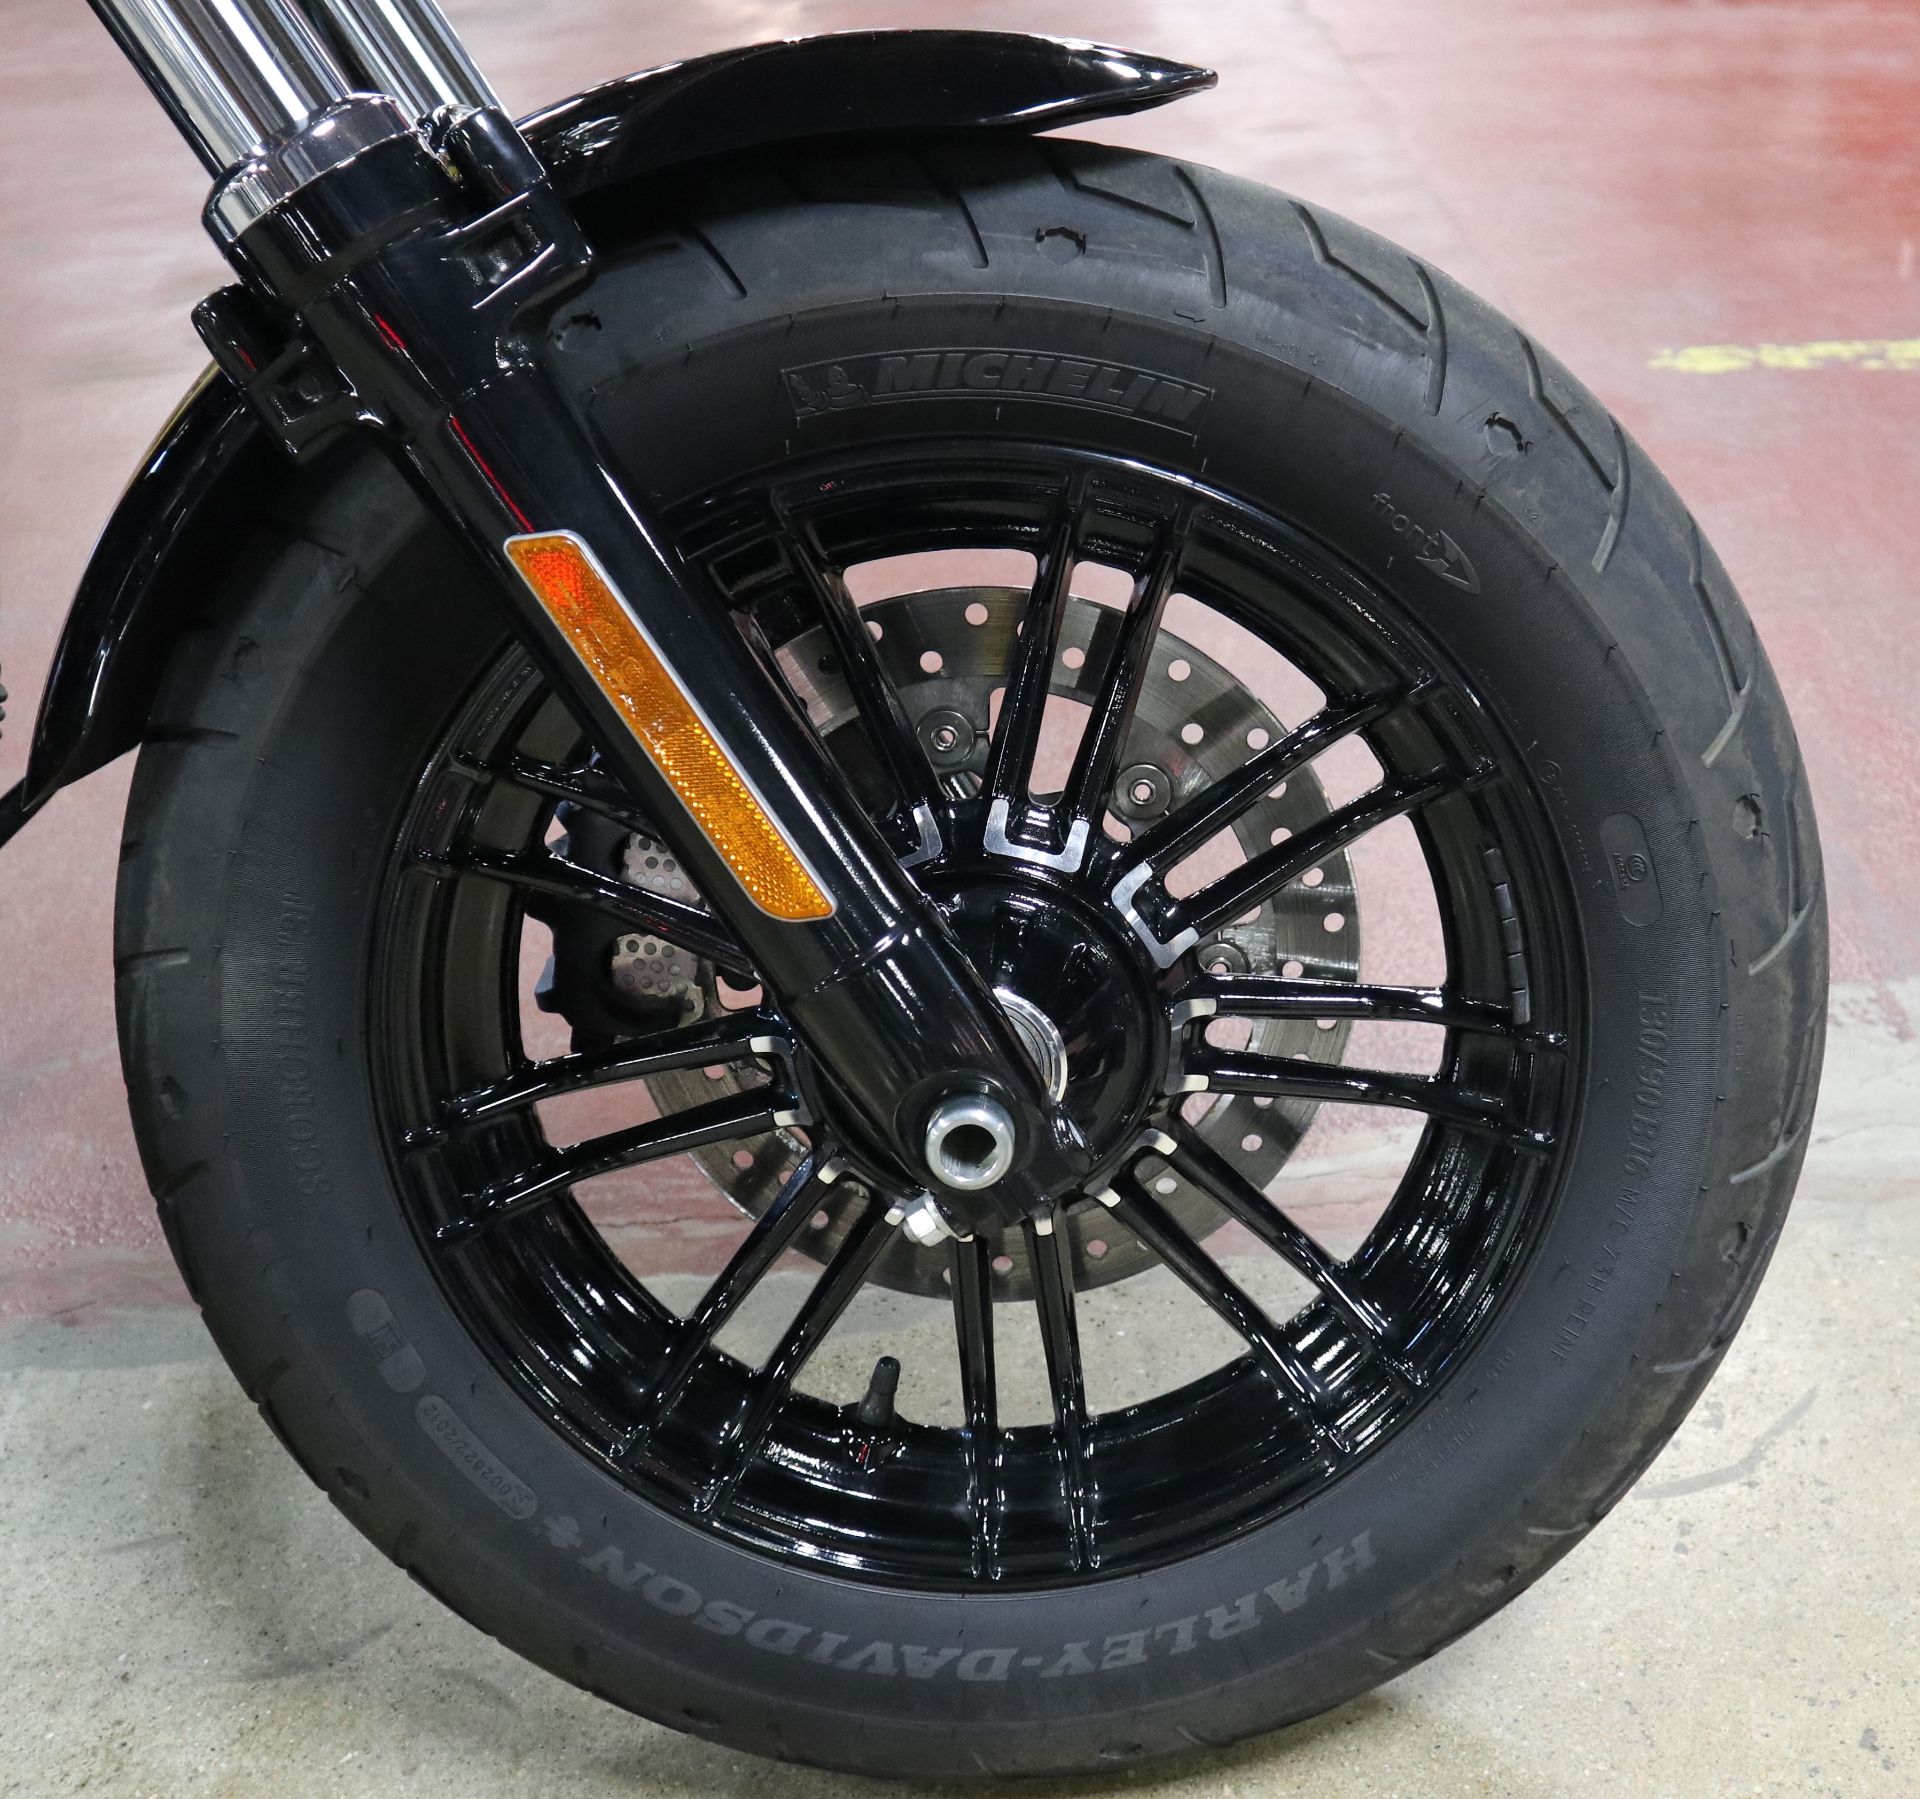 2022 Harley-Davidson Forty-Eight® in New London, Connecticut - Photo 13